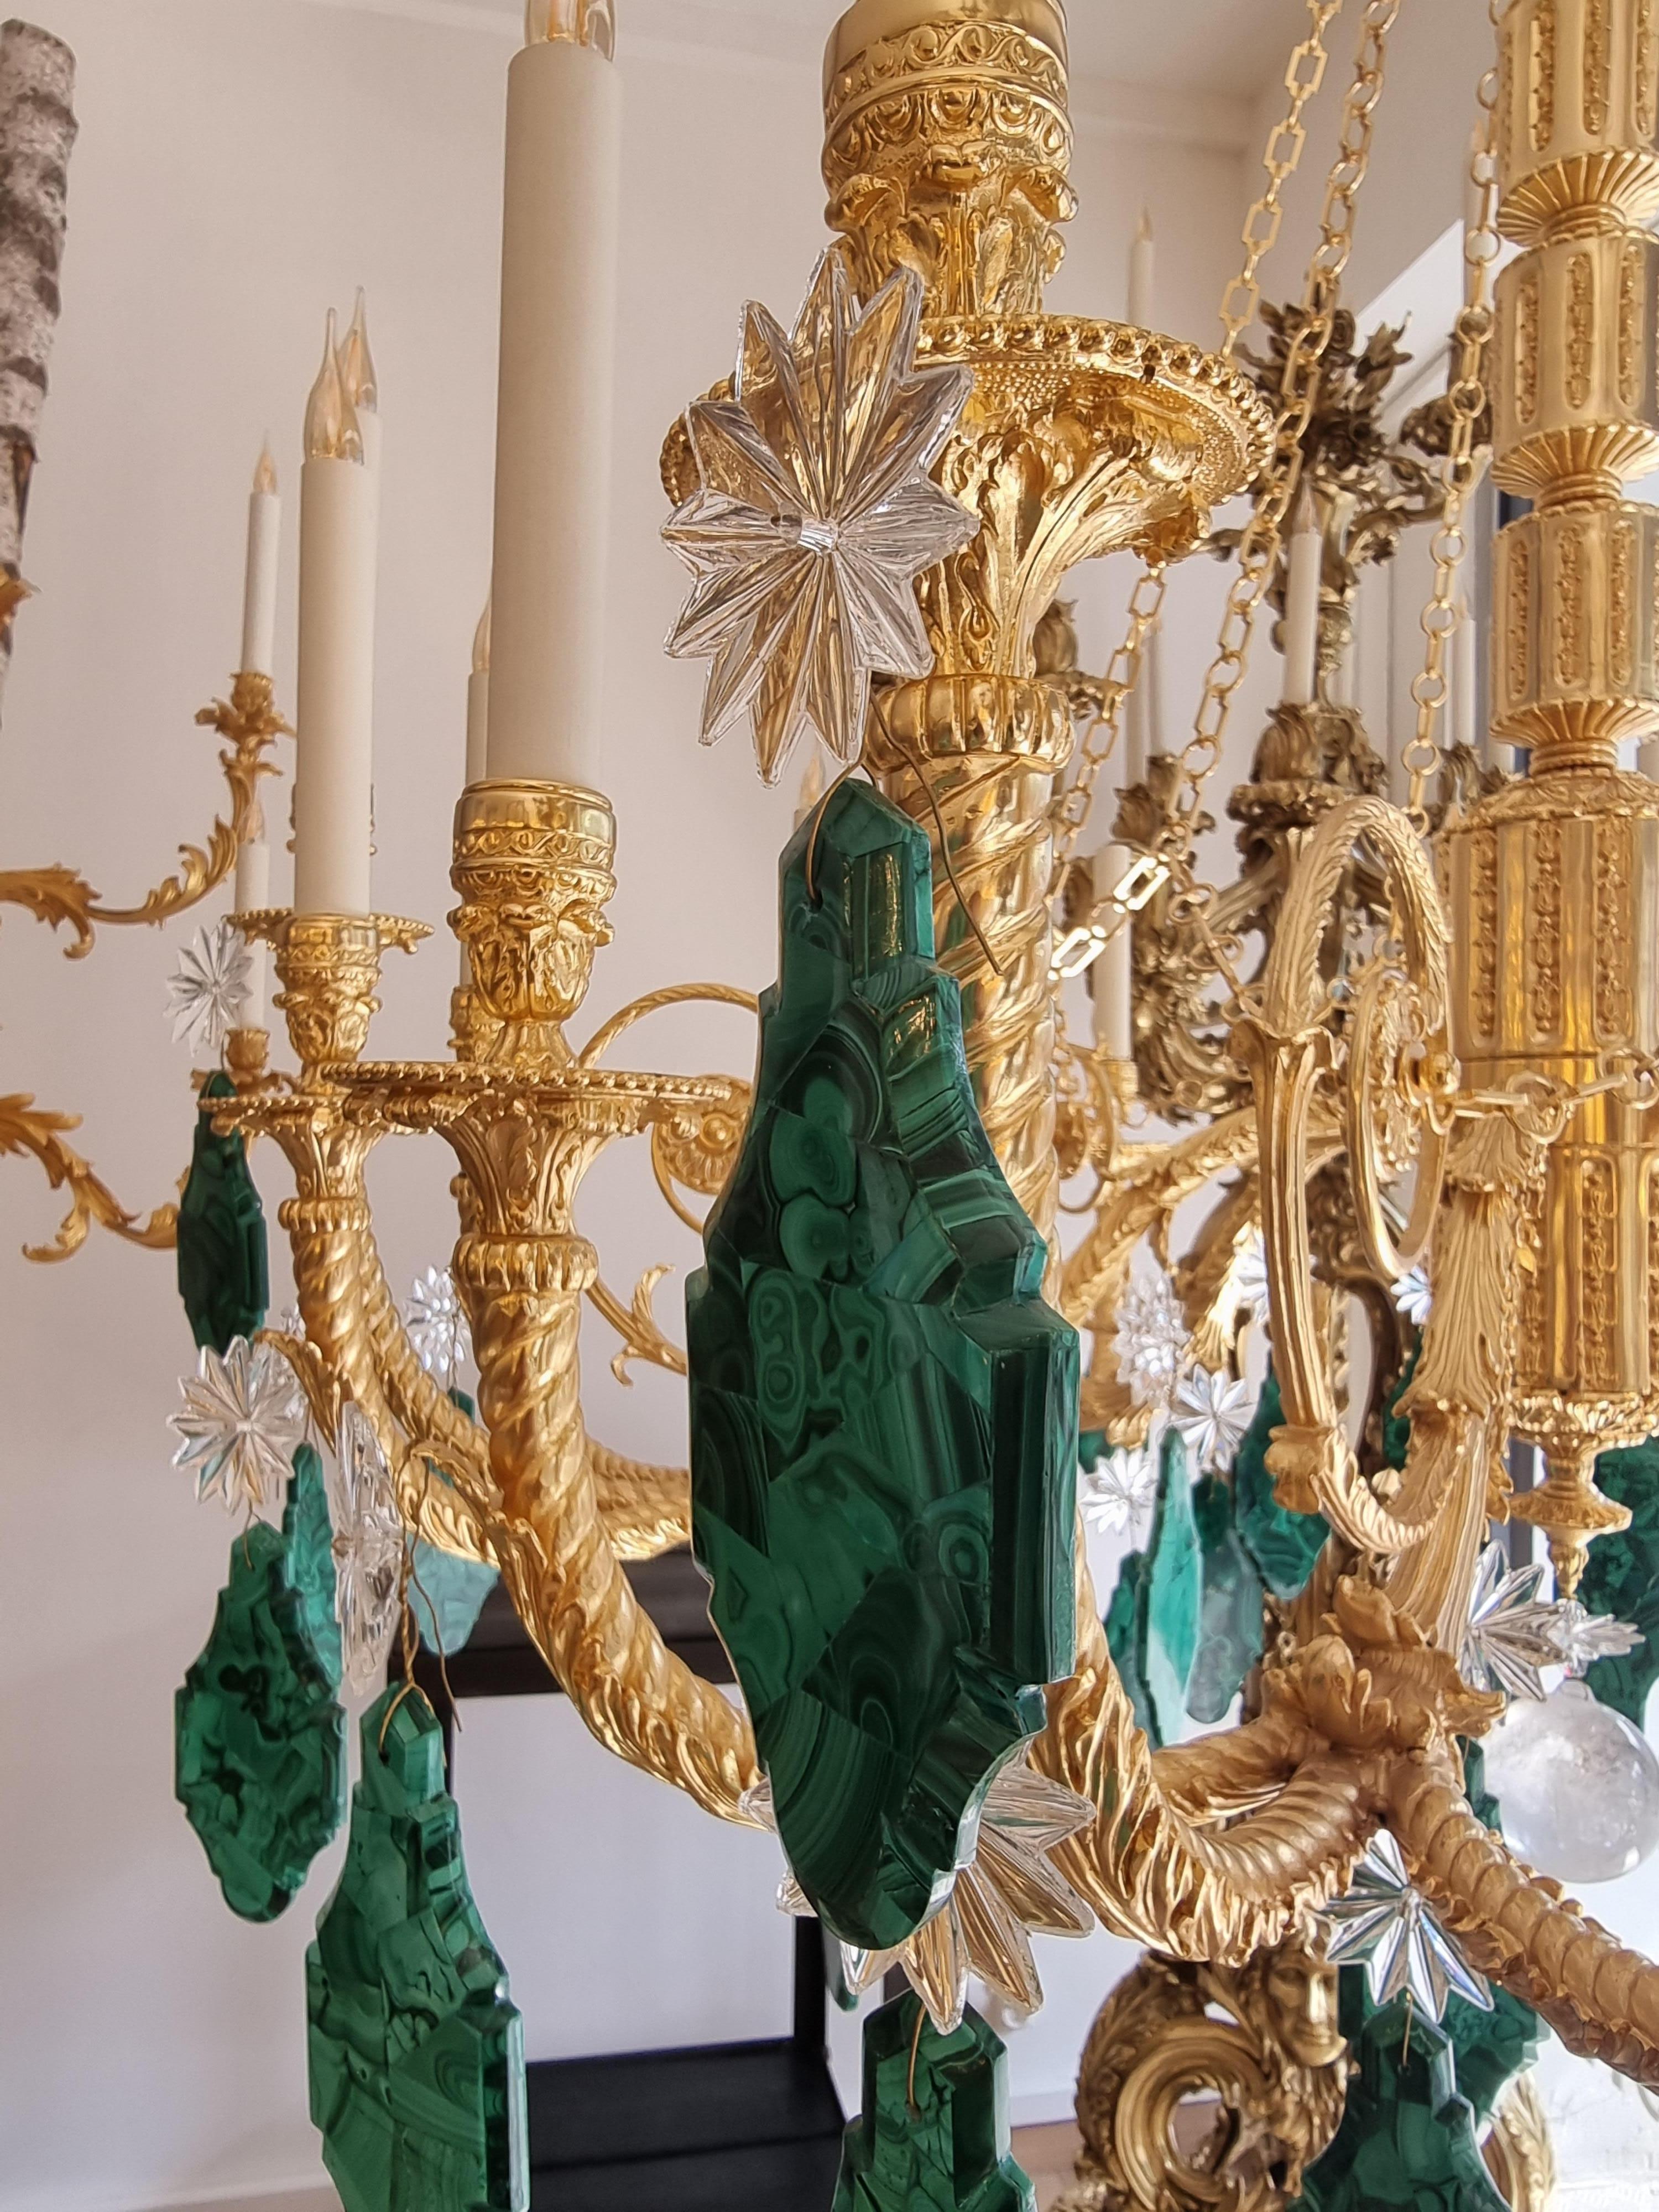 Chandelier with 18 light arms.
This chandelier is typical of the chain chandeliers of the 18th century, as for example the chandelier with arabesque of the castle of Versailles dating from 1780, which also has arms of similar light, or that of the